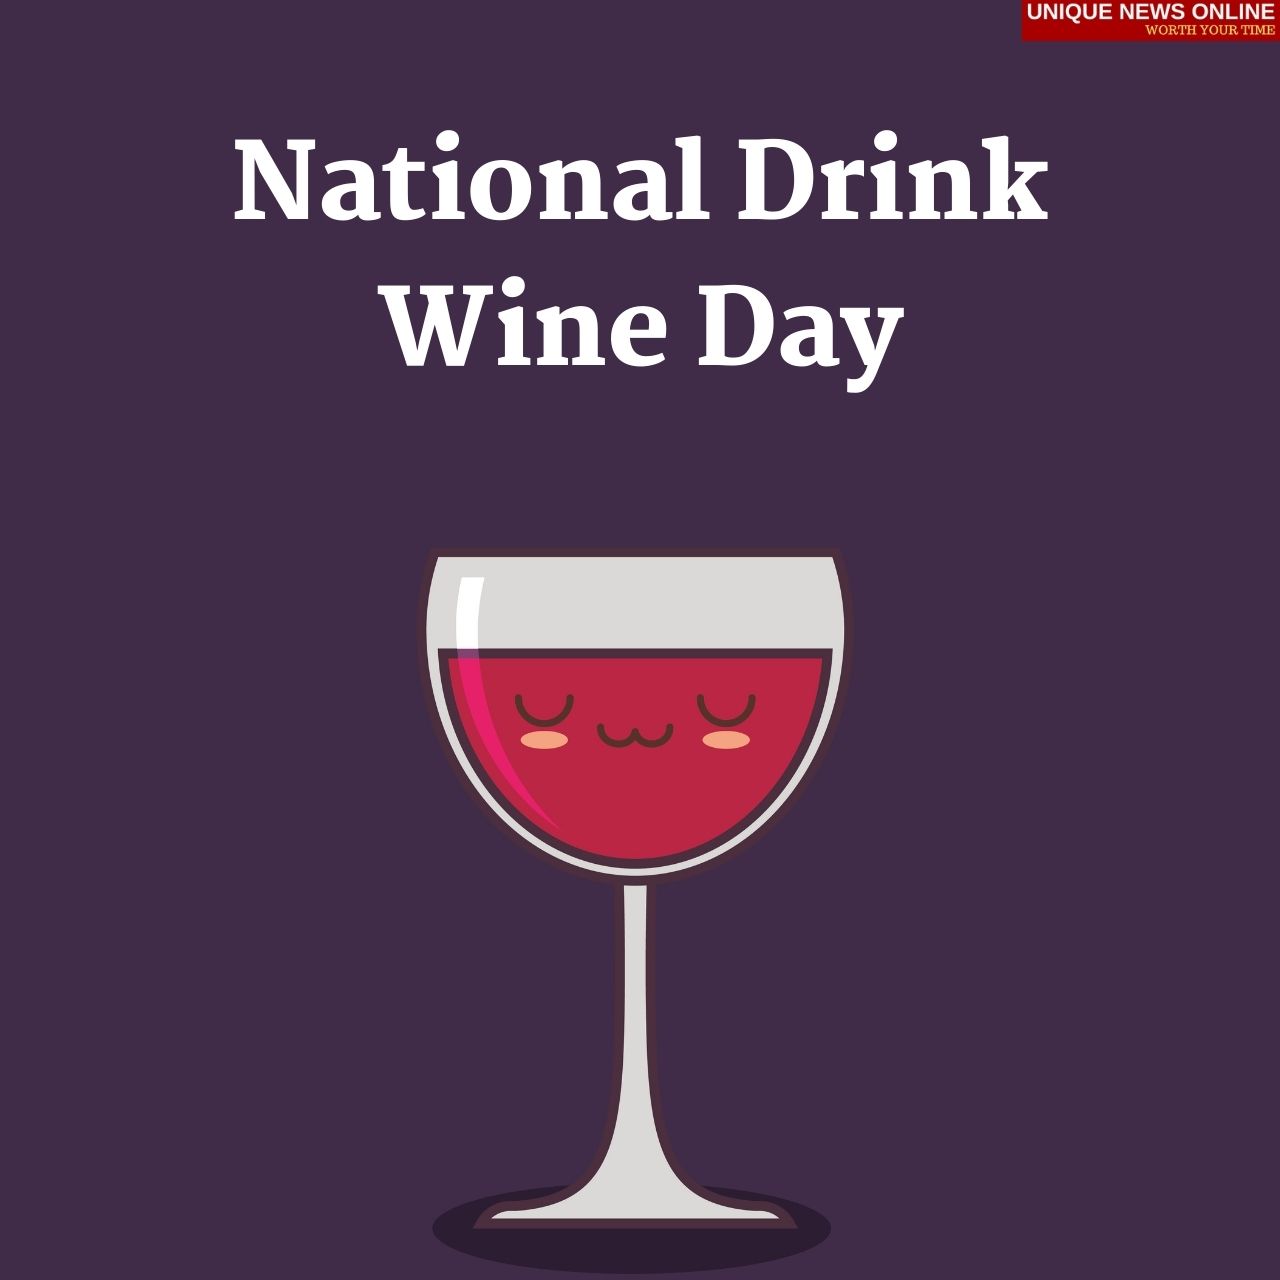 National Drink Wine Day (USA) 2022 Instagram Captions, Memes, HD Images